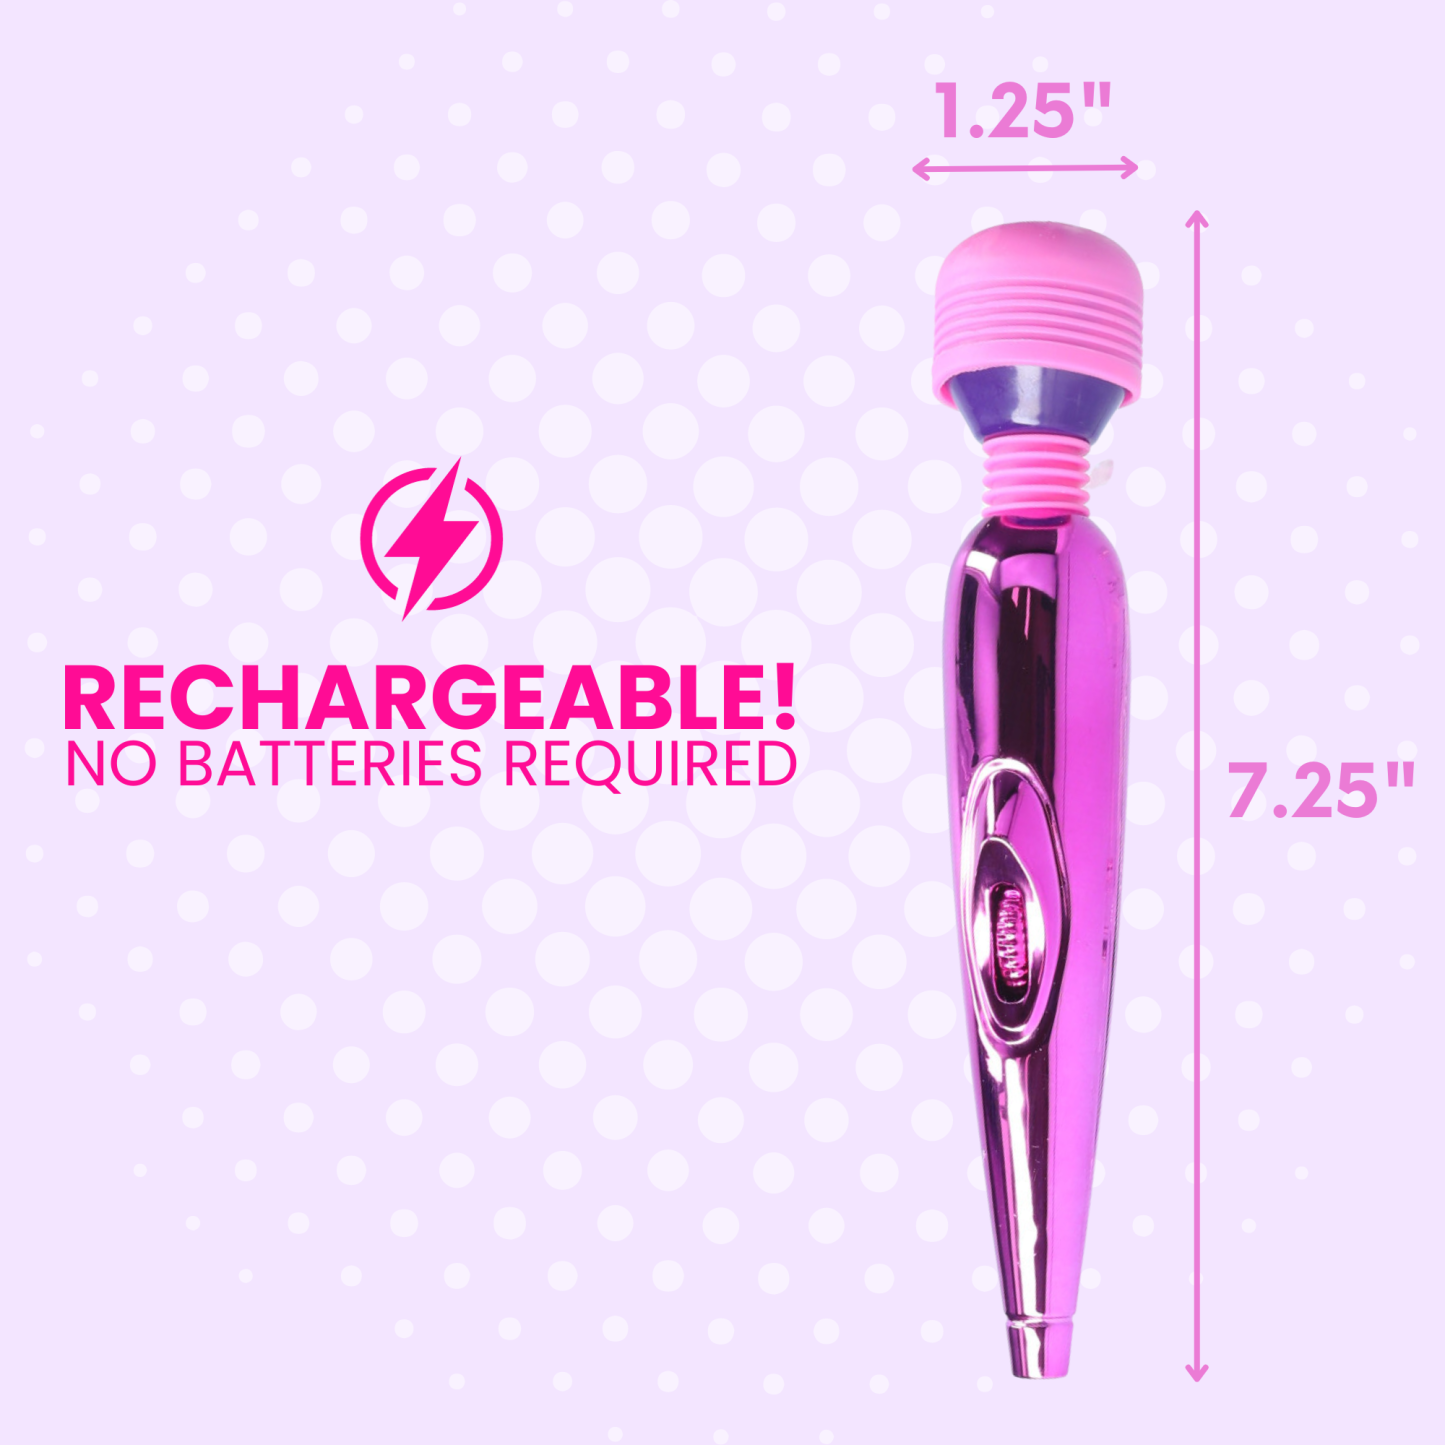 Free Mini Clit Wand Massager in Pink - Add to Your Cart!